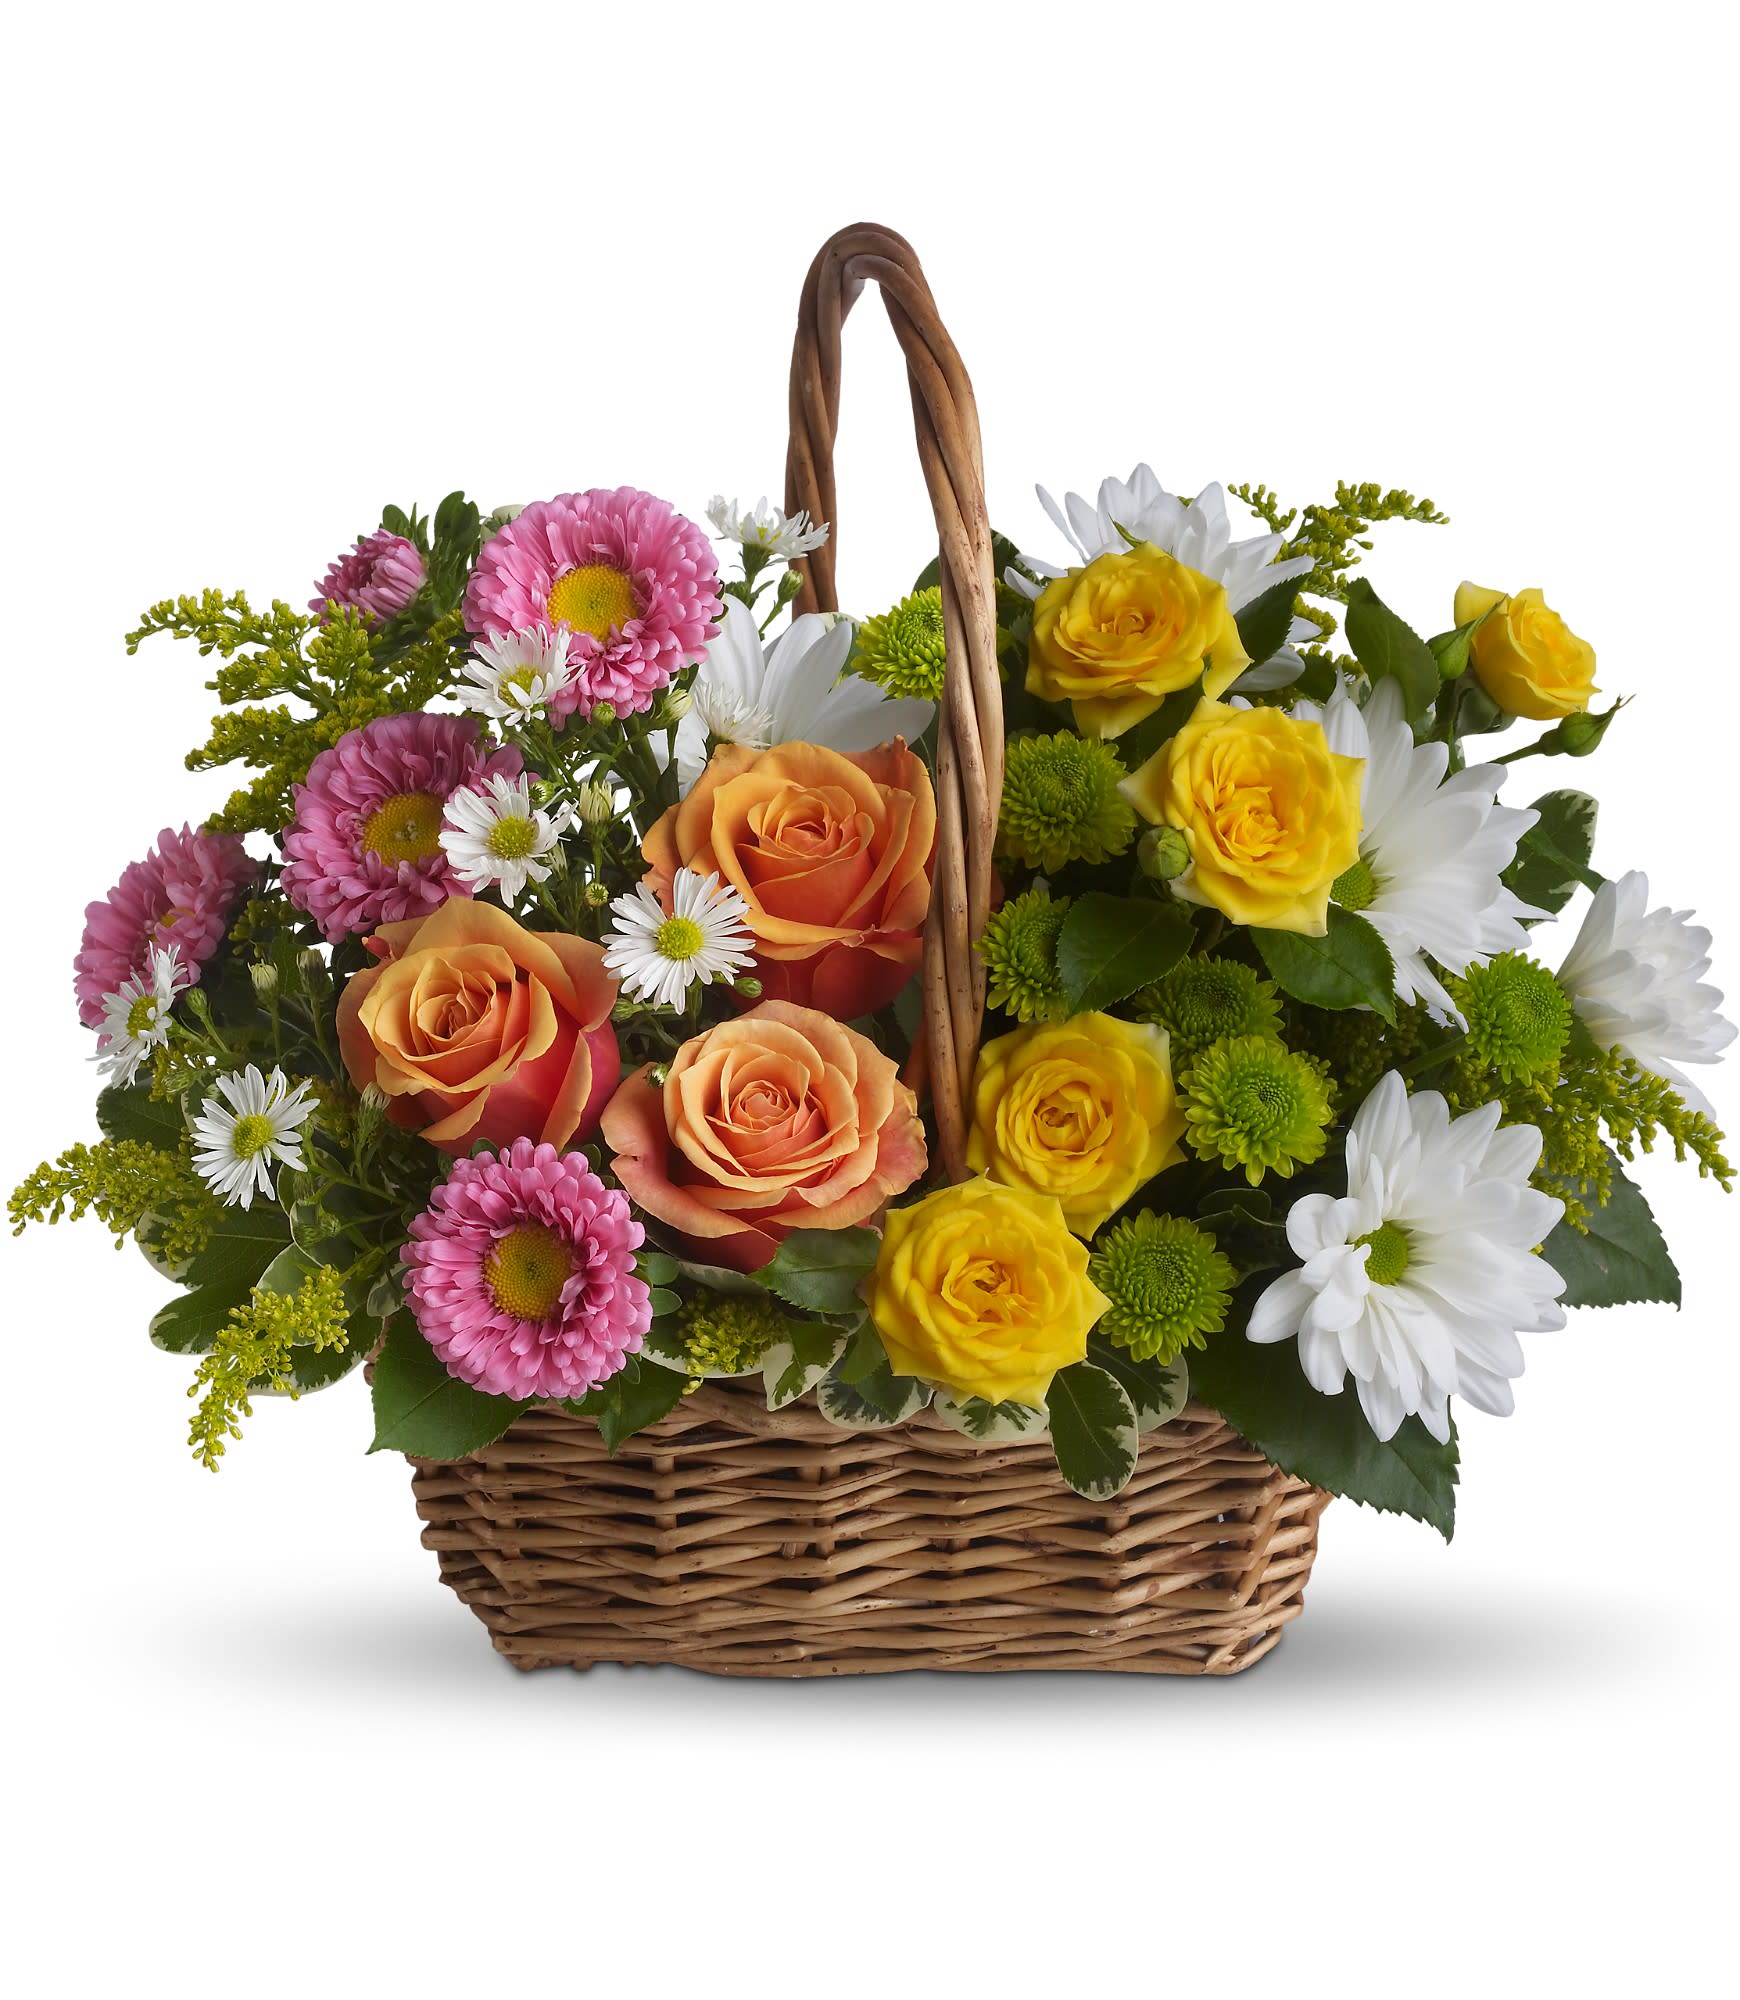 Sweet Tranquility Basket by Teleflora - A basket full of bright blossoms will deliver the warmth of sunshine even when the skies seem gray. This beautiful gift will be appreciated for its life-affirming brilliance and your thoughtfulness at this time. 